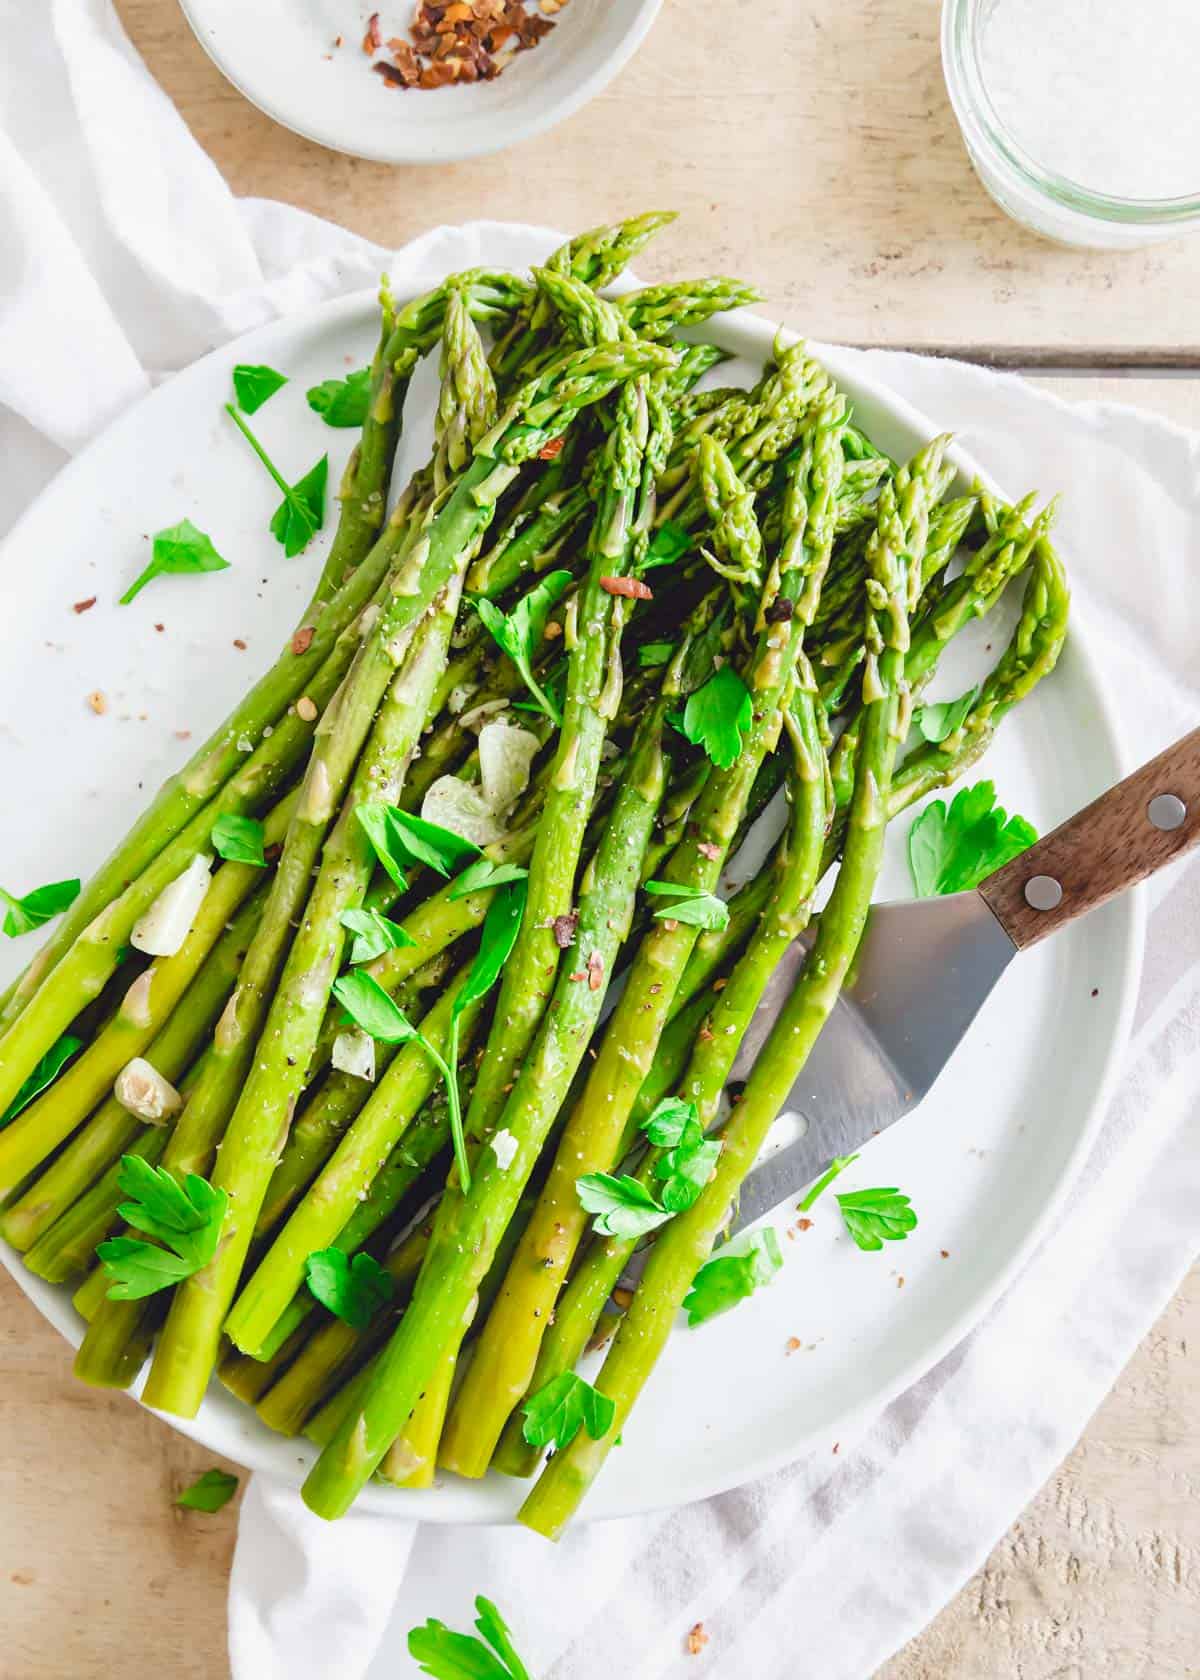 Pressure cooked asparagus on a plate with a serving spatula garnished with garlic, fresh parsley and chili flakes.